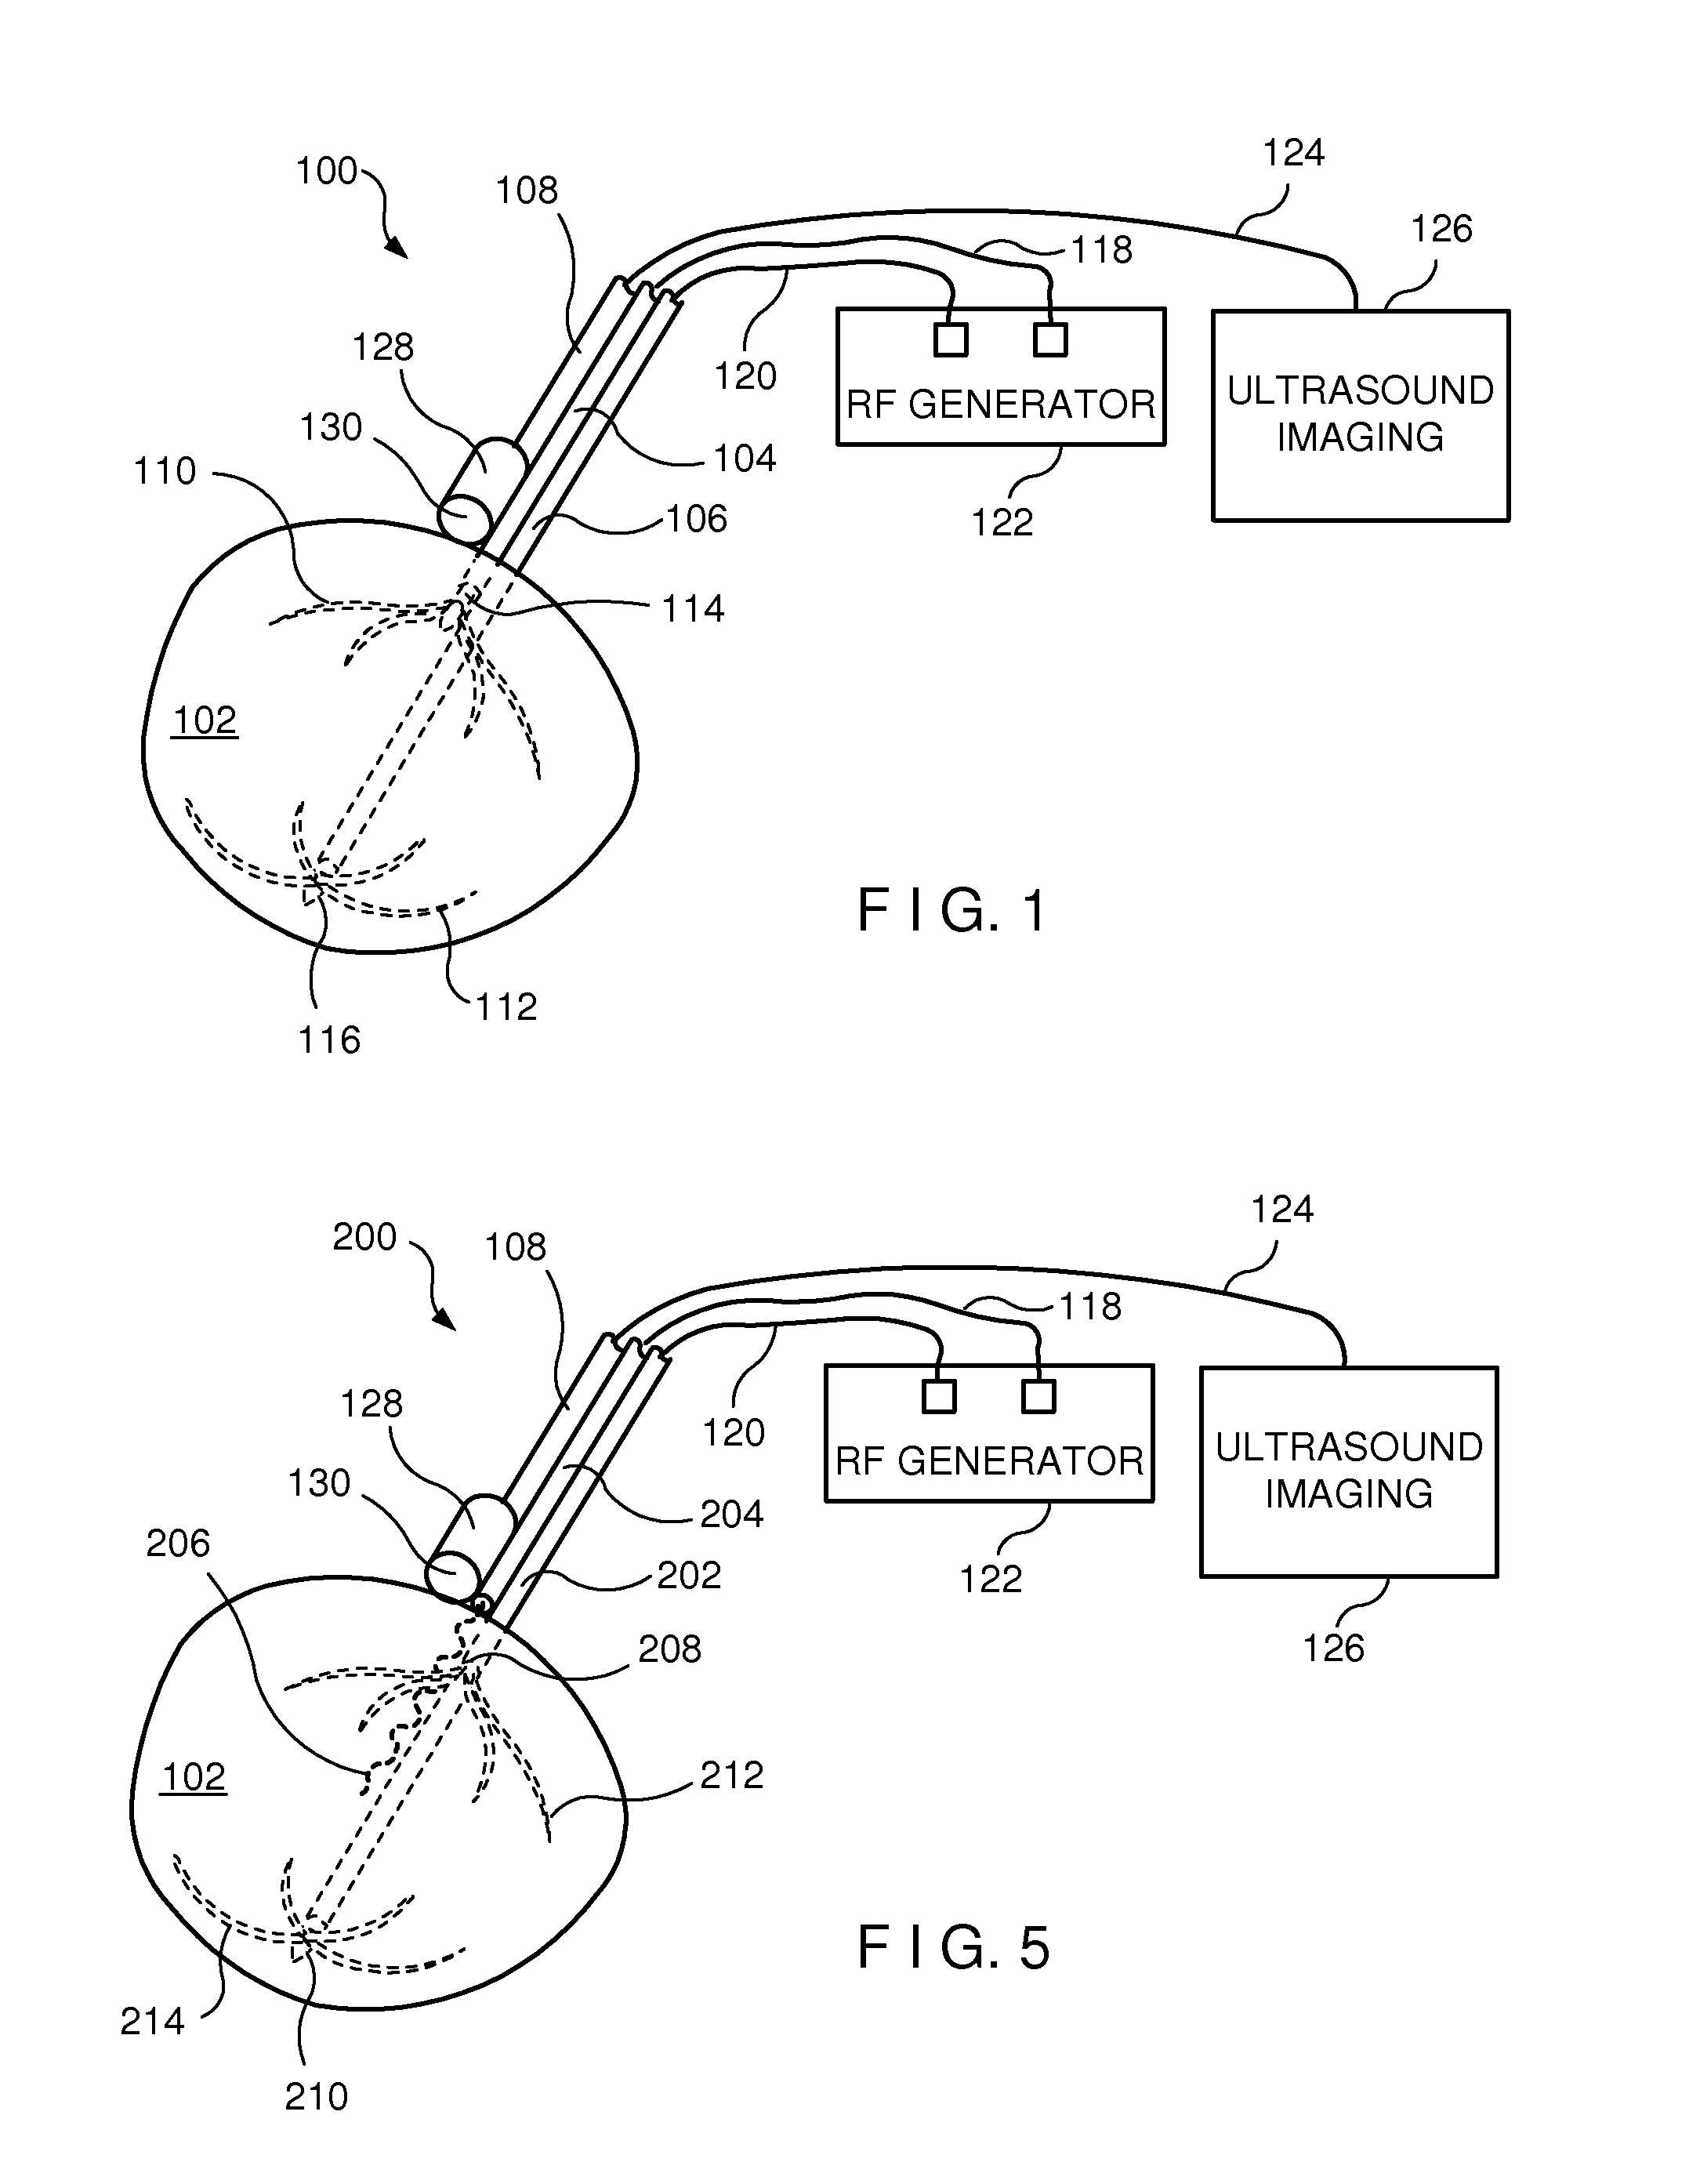 Radio frequency ablation system with integrated ultrasound imaging